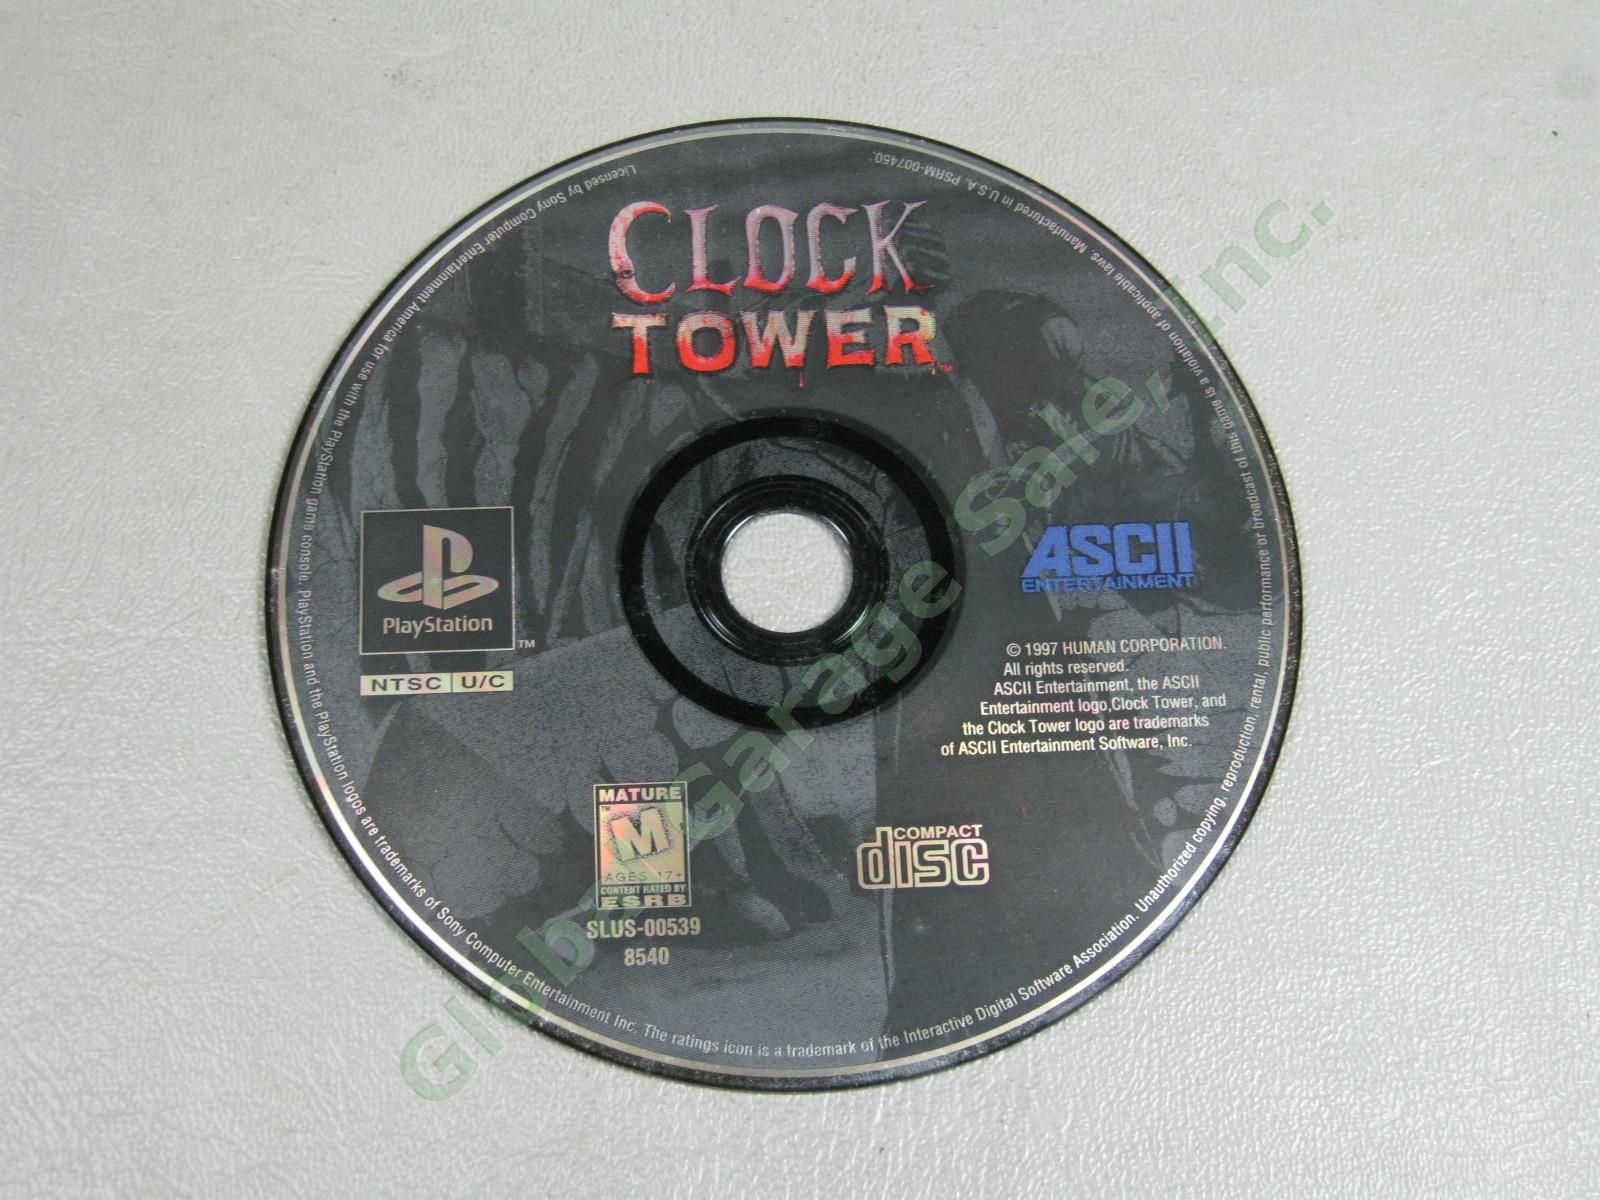 Sony Playstation 1 PS1 PSX PSOne Black Label BL Game Clock Tower Complete CIB NR 4